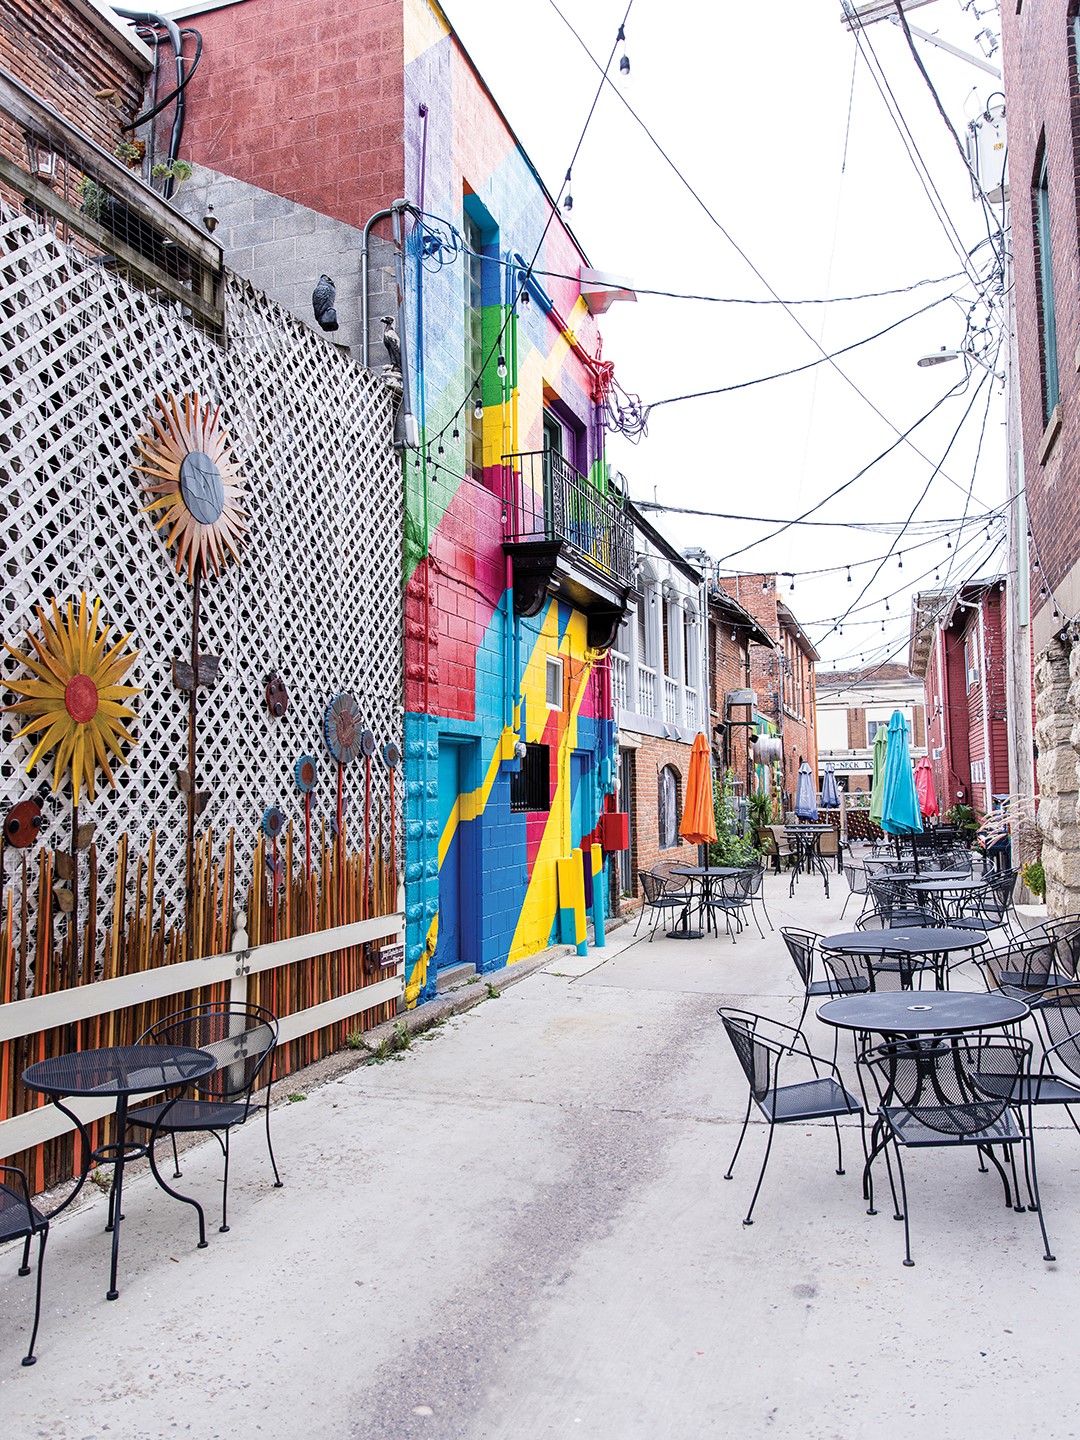 Union Art Alley, once known as "garbage alley," is now a community center of color and conversation. 